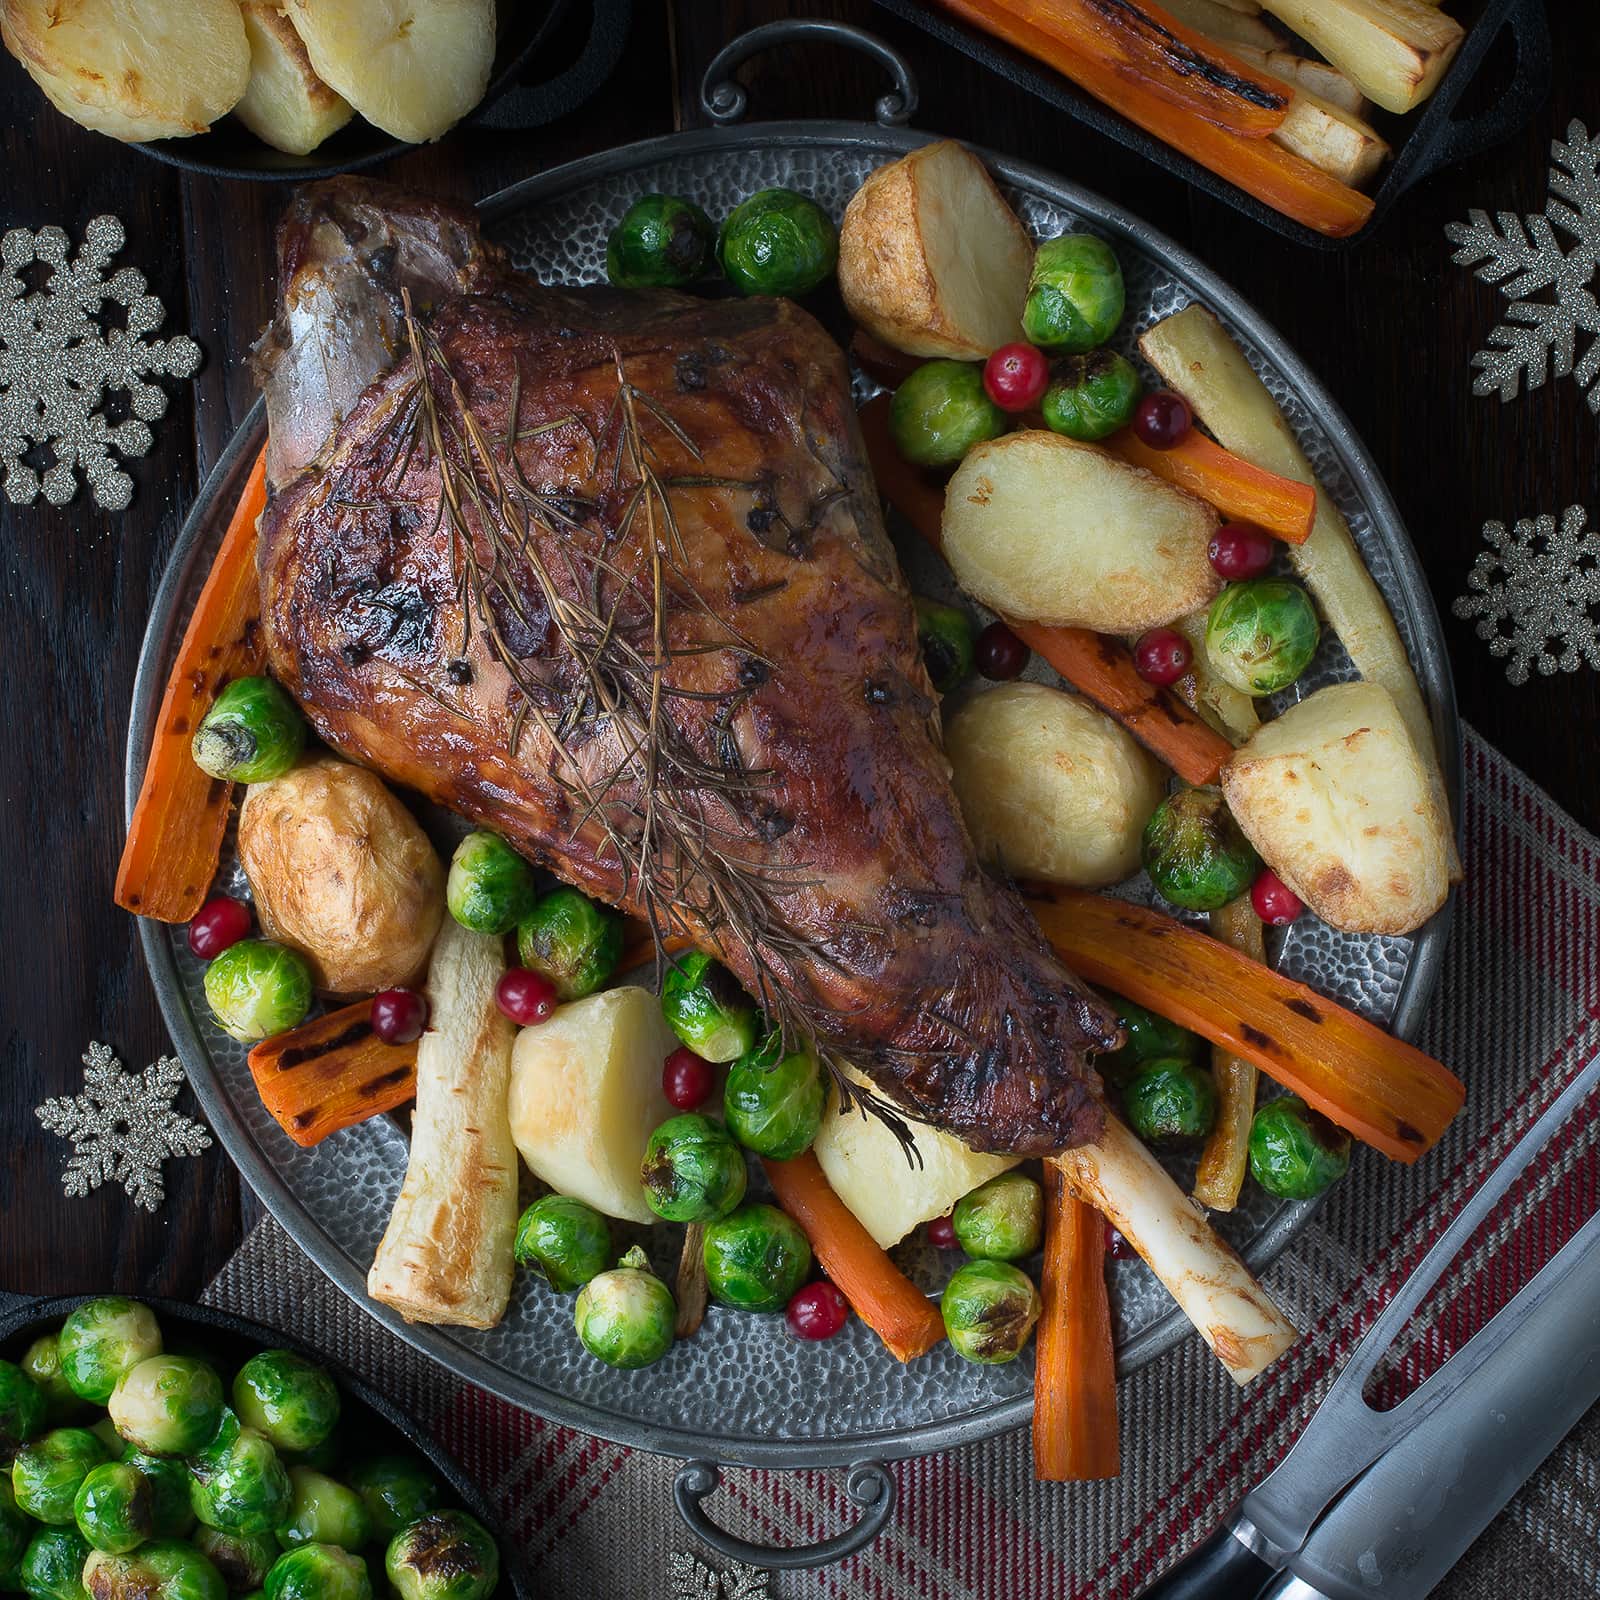 My festive roast leg of lamb flavoured with rosemary, cloves, orange and cranberries makes a fantastic alternative to turkey on Christmas day or to feed your family and friends over the festive period.